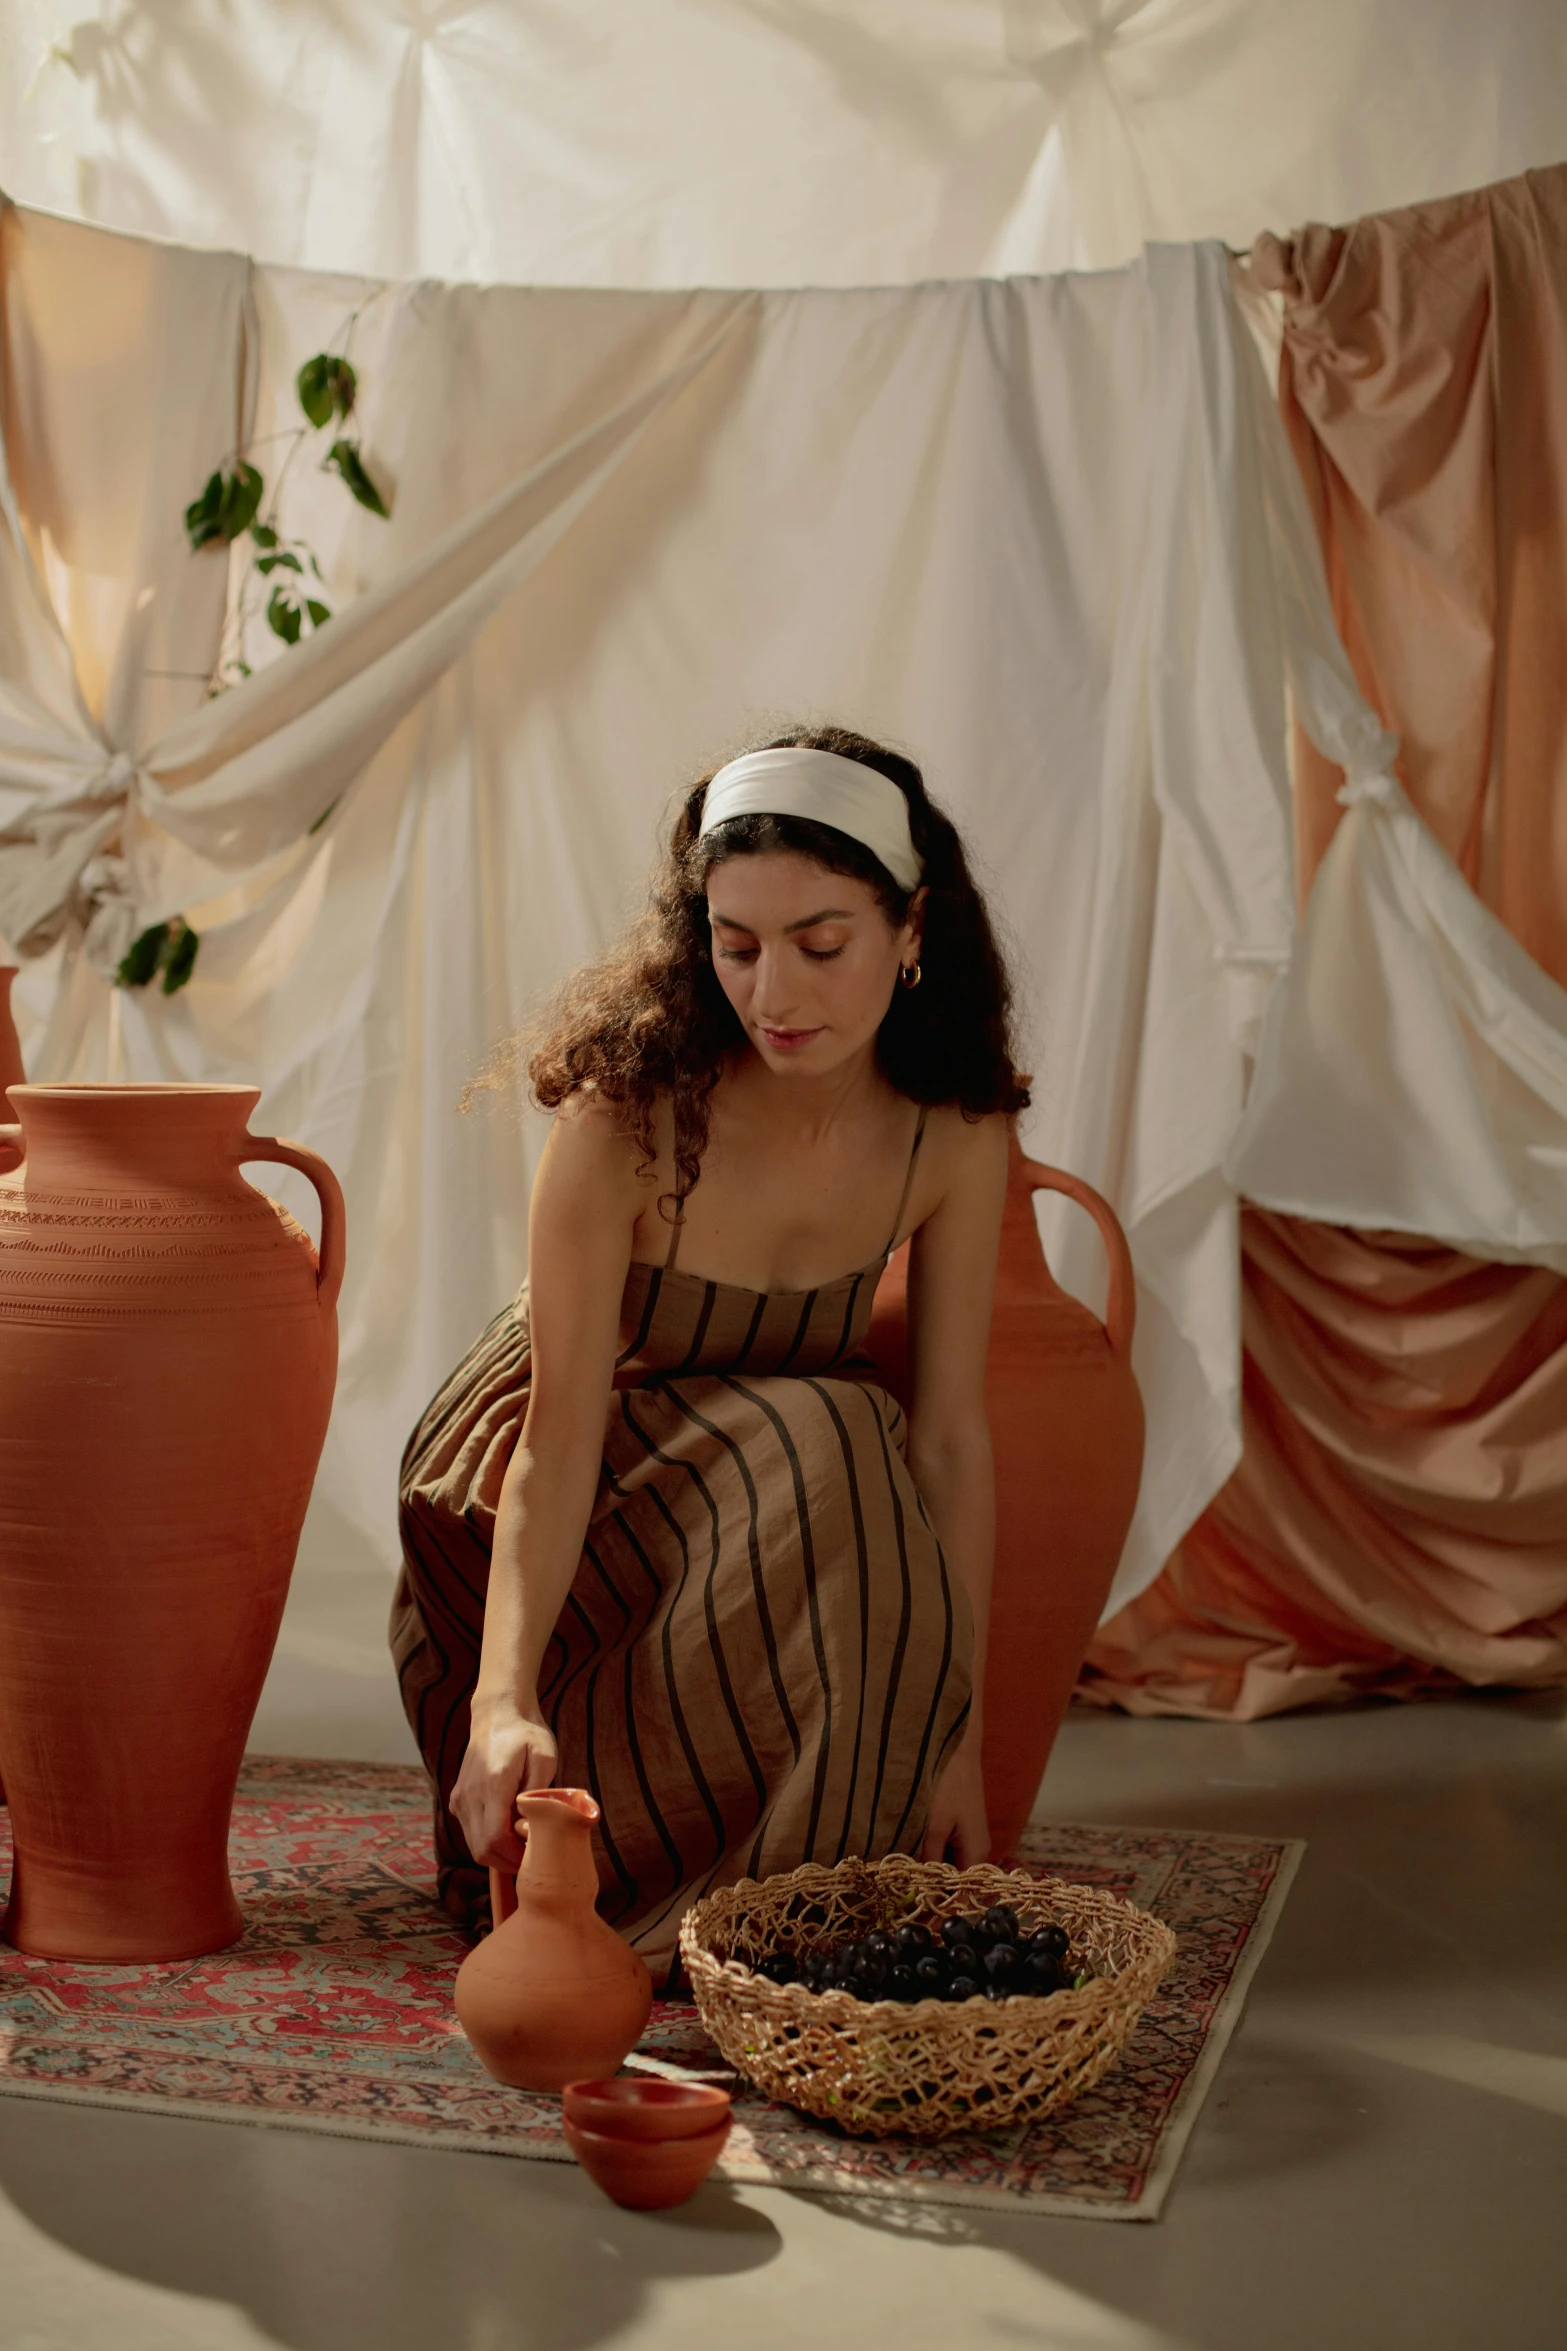 a woman sitting on the floor next to some large pots